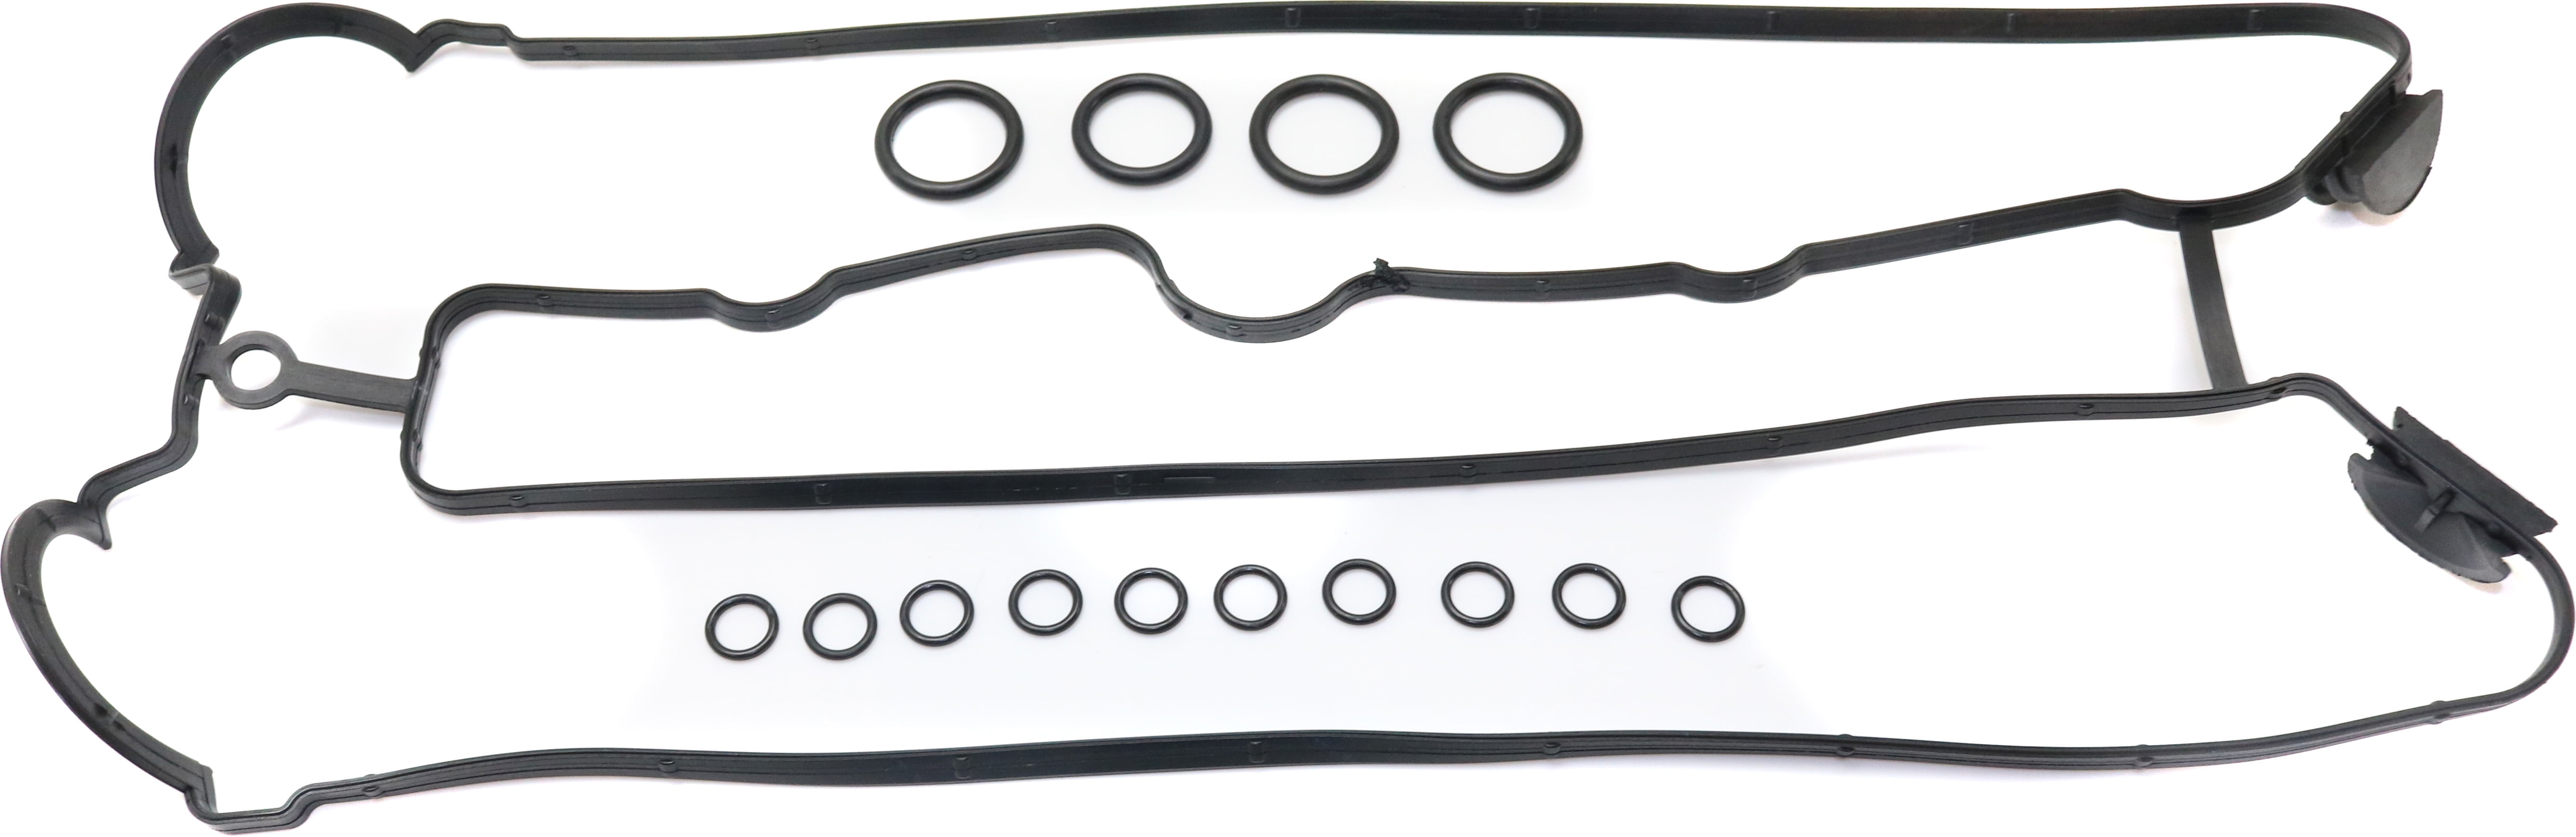 Valve Cover Gasket Compatible with 2004-2008 Suzuki Forenza 1999-2002 Daewoo  Leganza 4Cyl 2.0L 2.2L